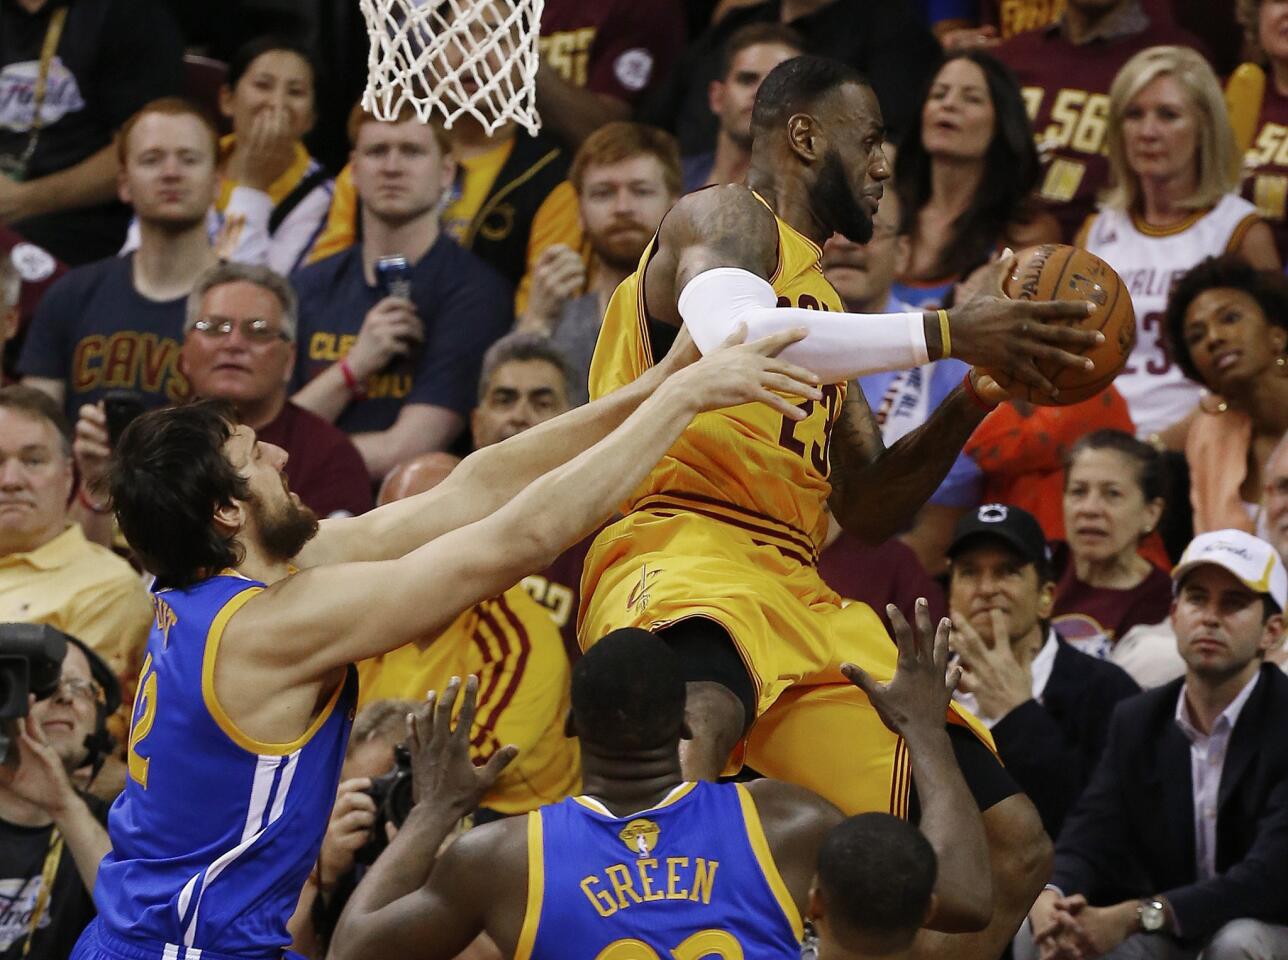 Cavaliers forward LeBron James is knocked out of the air, and sent tumbling out of bounds, by Warriors center Andrew Bogut, who was called for a foul on the play that left James with a bloody head.